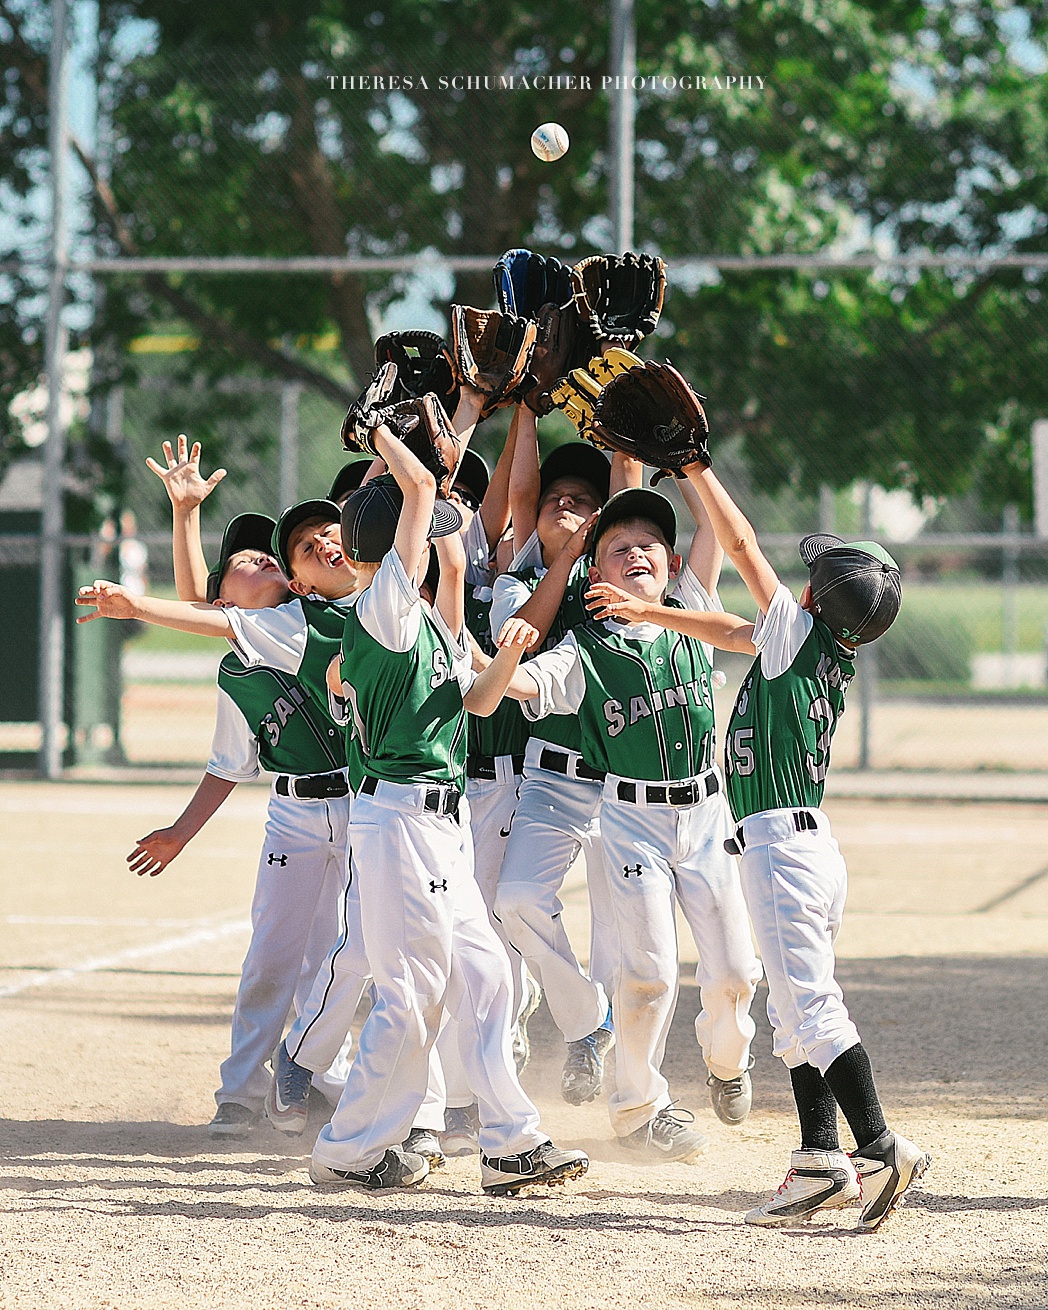 Little League Baseball Iowa State Fair Photography Contest Honorable Mention